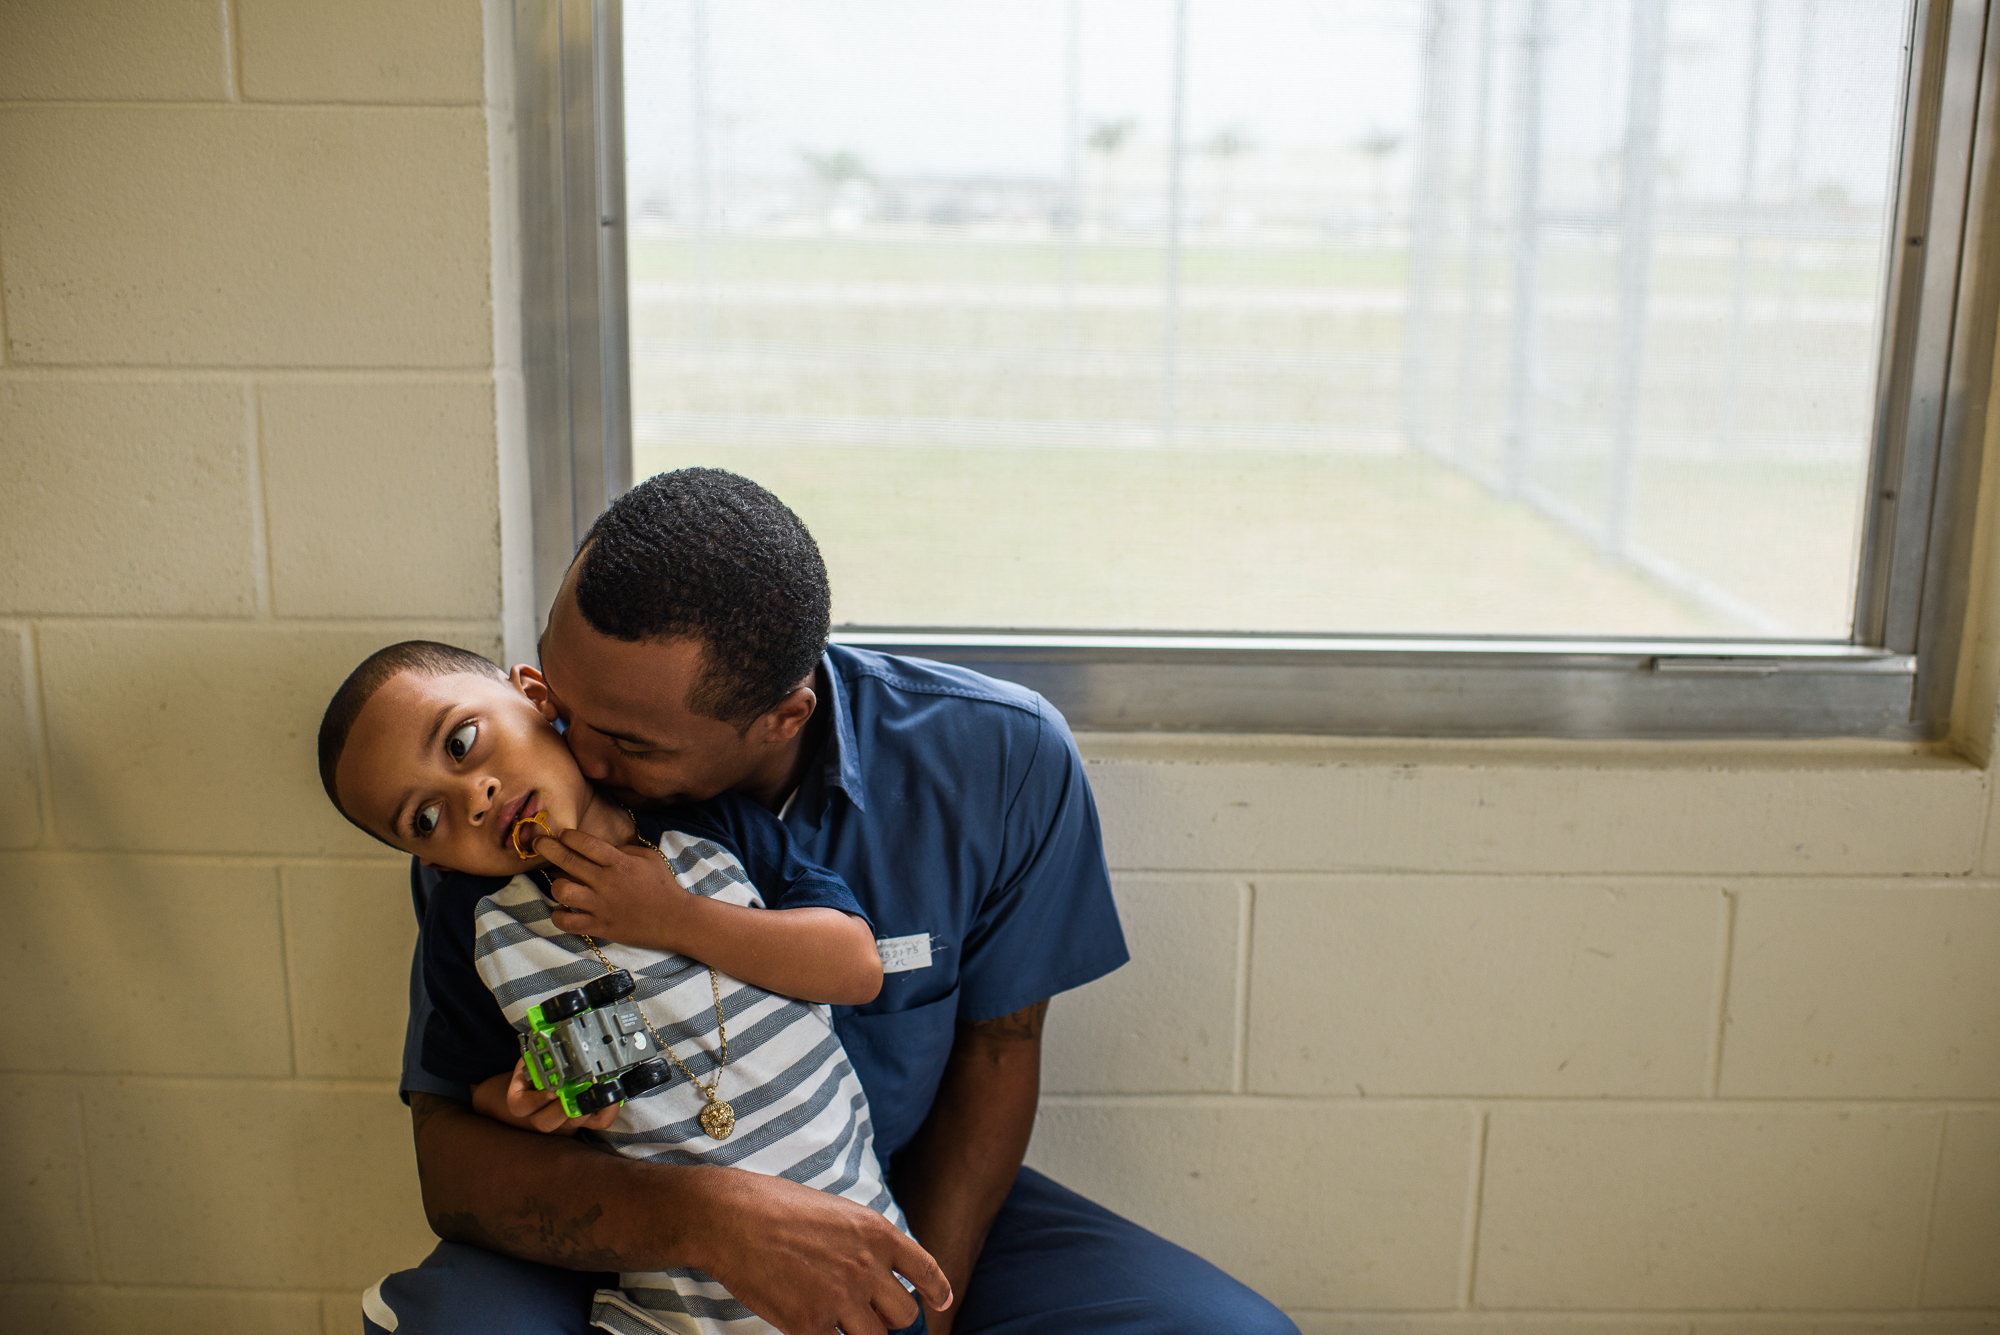  Arnaldo, age 28, kisses his son Joseph, age 4, during a visit at the Okeechobee Correctional Institution in Okeechobee, Florida, where Arnaldo is incarcerated. “My son asks me, ‘When are you getting out of time-out?’ I tell him the reality of where 